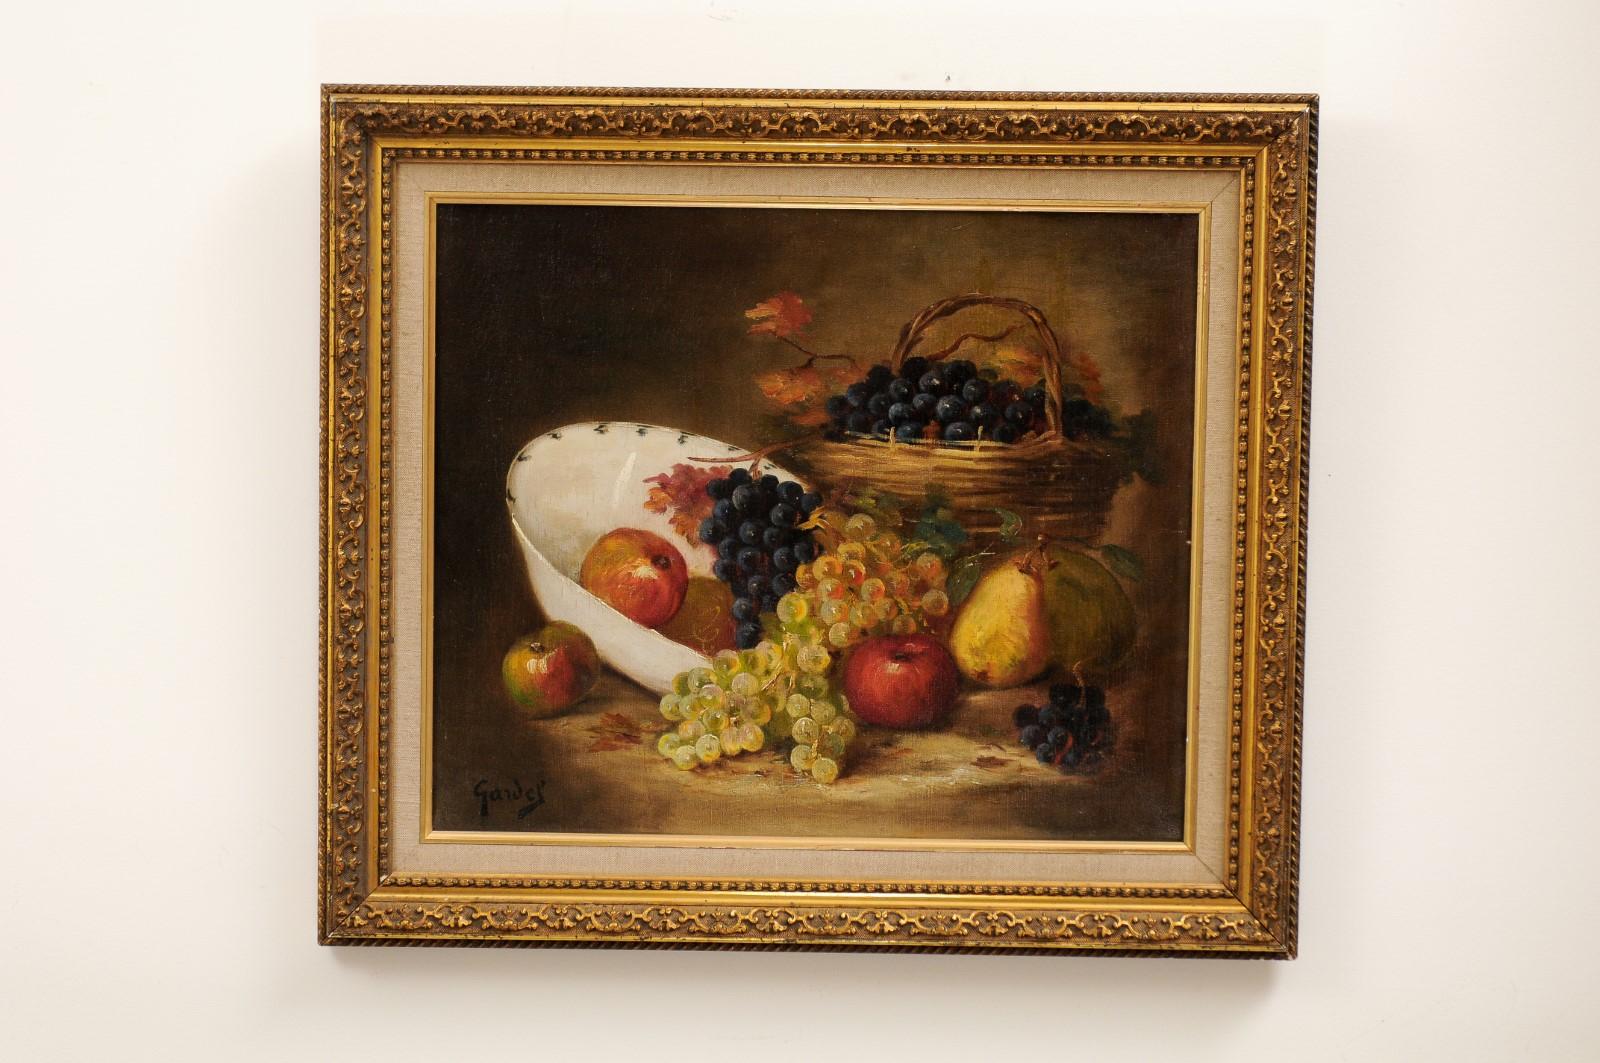 A French oil on canvas still-life painting from the 19th century, depicting fruits and set in giltwood frame. Created in France during the 19th century, this oil painting depicts a careful arrangement of mouth-watering grapes, pears and apples. The